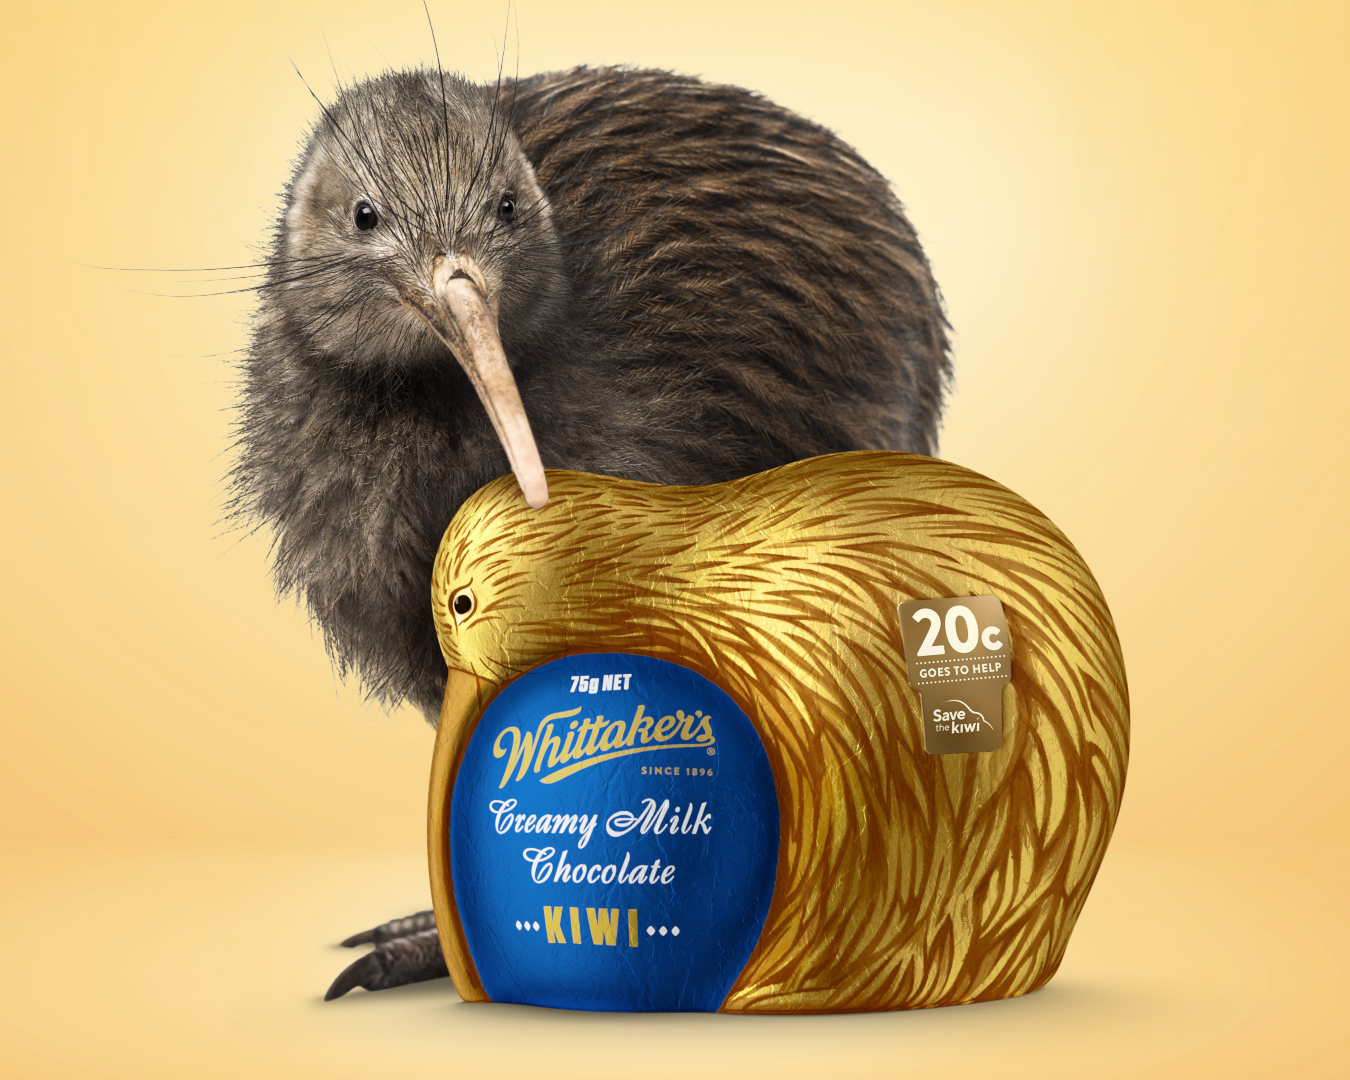 A real-life Kiwi stands behind a chocolate version, made especially for Easter by Whittaker's.